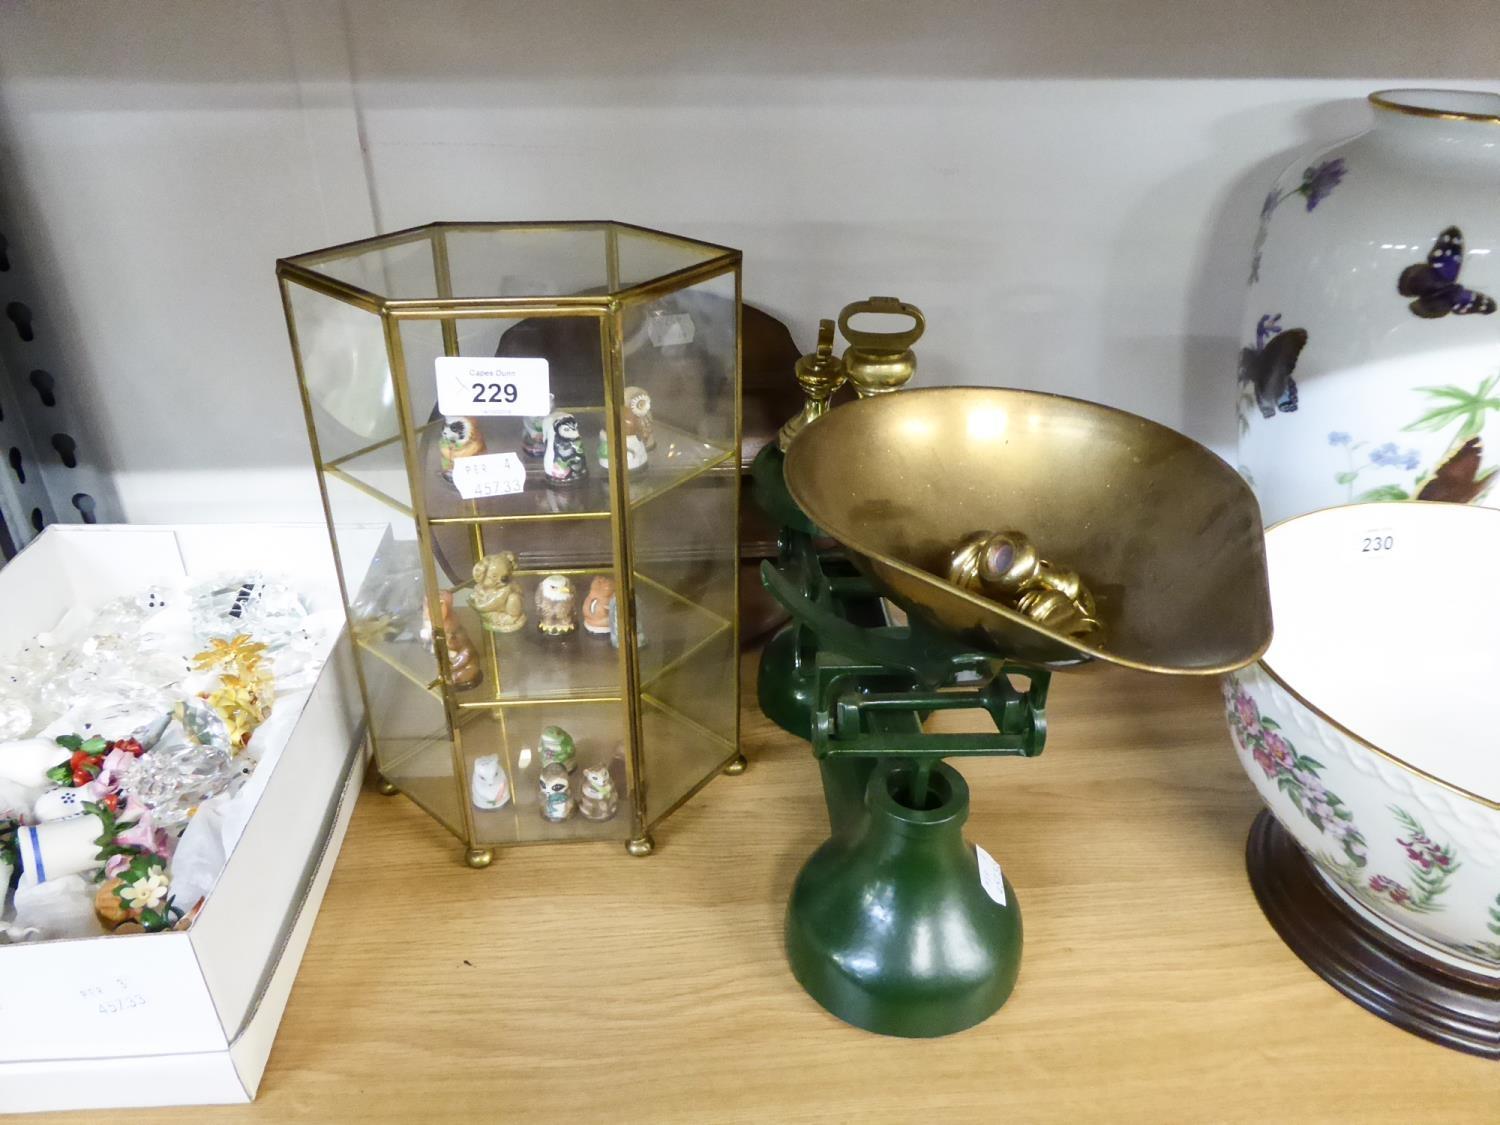 SET OF METAL KITCHEN SCALES WITH BRASS WEIGHTS CIRCA TWENTIETH CENTURY AND PORCELAIN THIMBLE DISPLAY